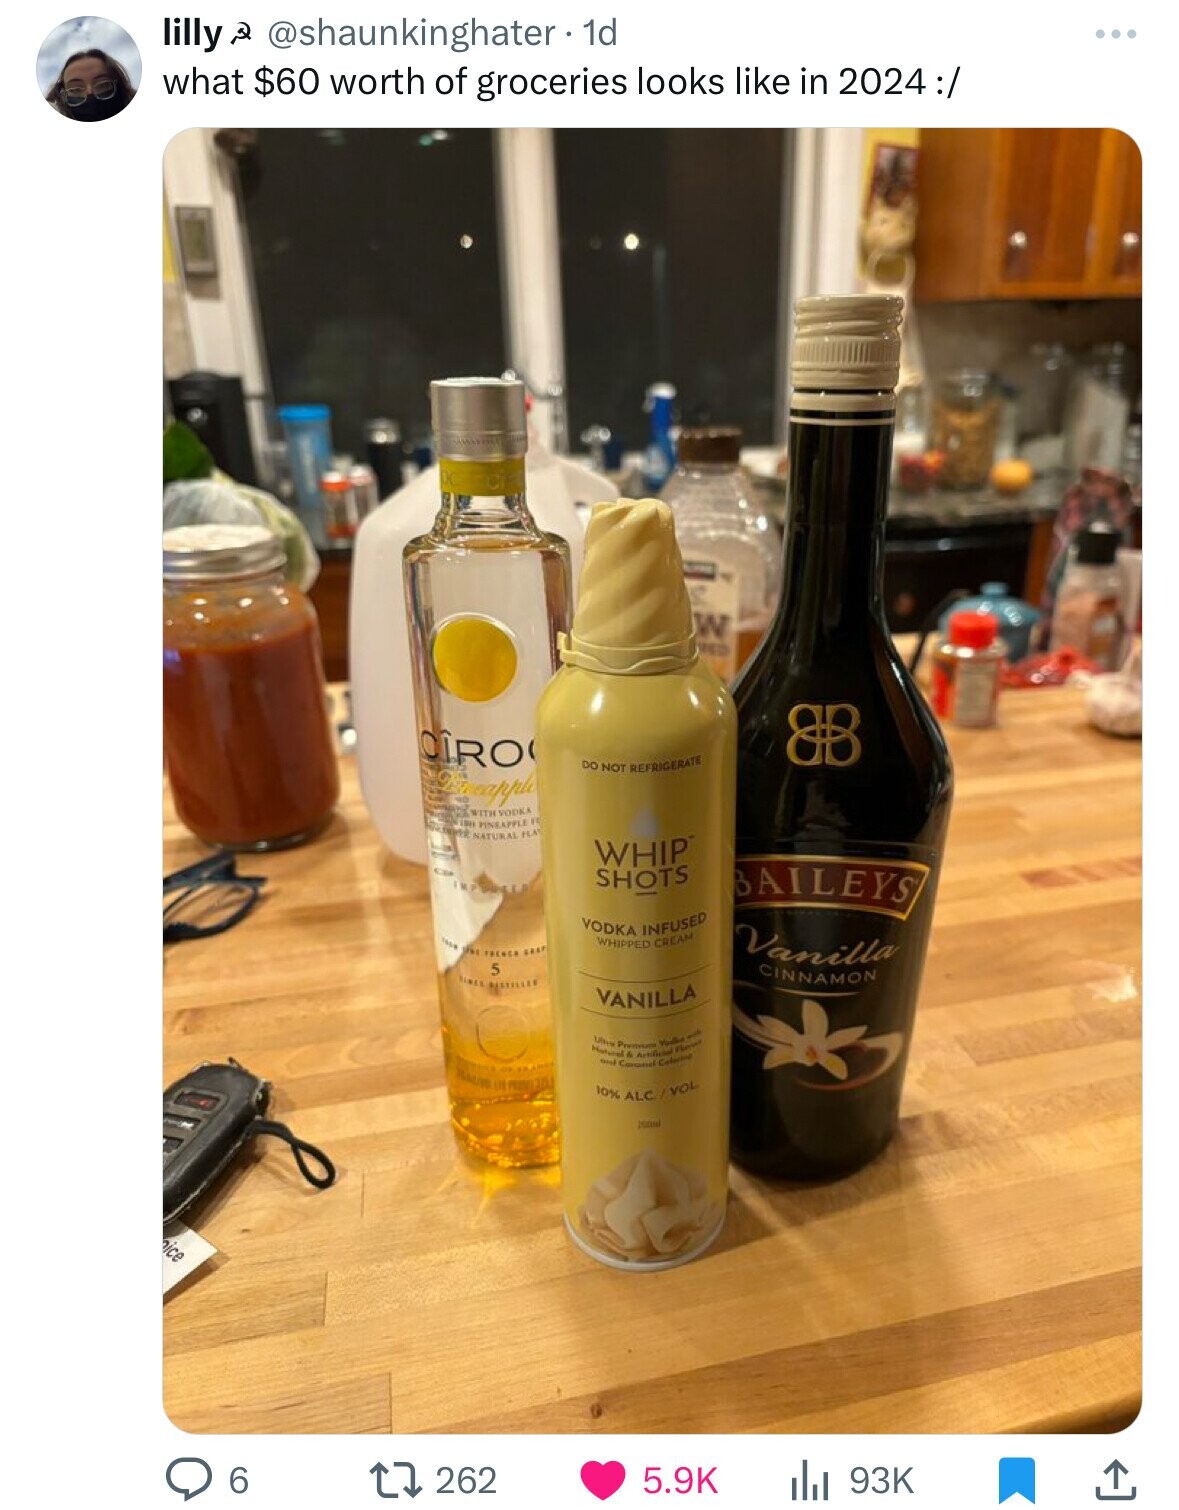 liqueur - lilly 1d what $60 worth of groceries looks in 2024 Ciro Peapple With Vodka Pineapple Natural Fea 10 The Fechce Sra 5 Nel Mestillle 262 W Do Not Refrigerate Whip Shots Vodka Infused Whipped Cream Vanilla U Prvm Vo Artifi Col Col 10% AlcVol 200 Fl